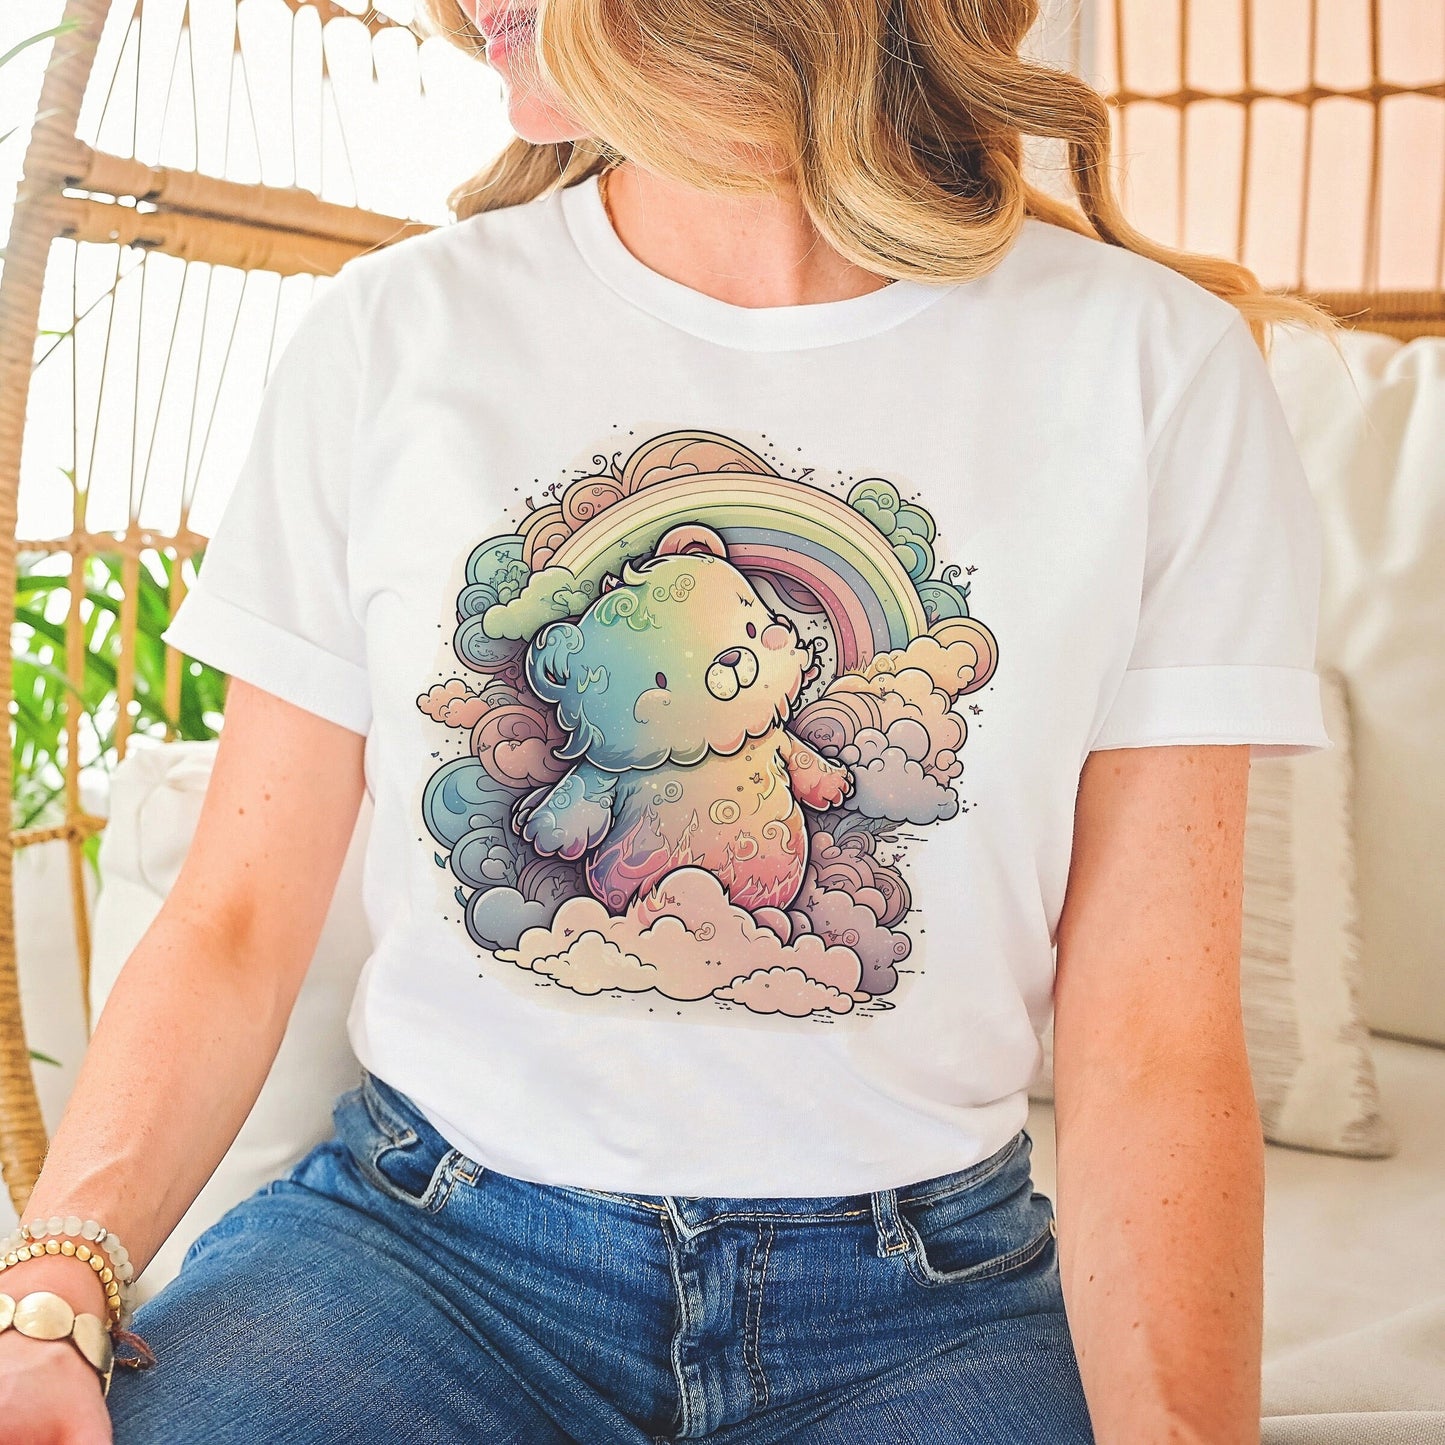 Illustrated Bears that Care 80s 1980s Nostalgia Parody AI Generated Graphic Tee Unisex Soft Tee T-shirt for Women or Men